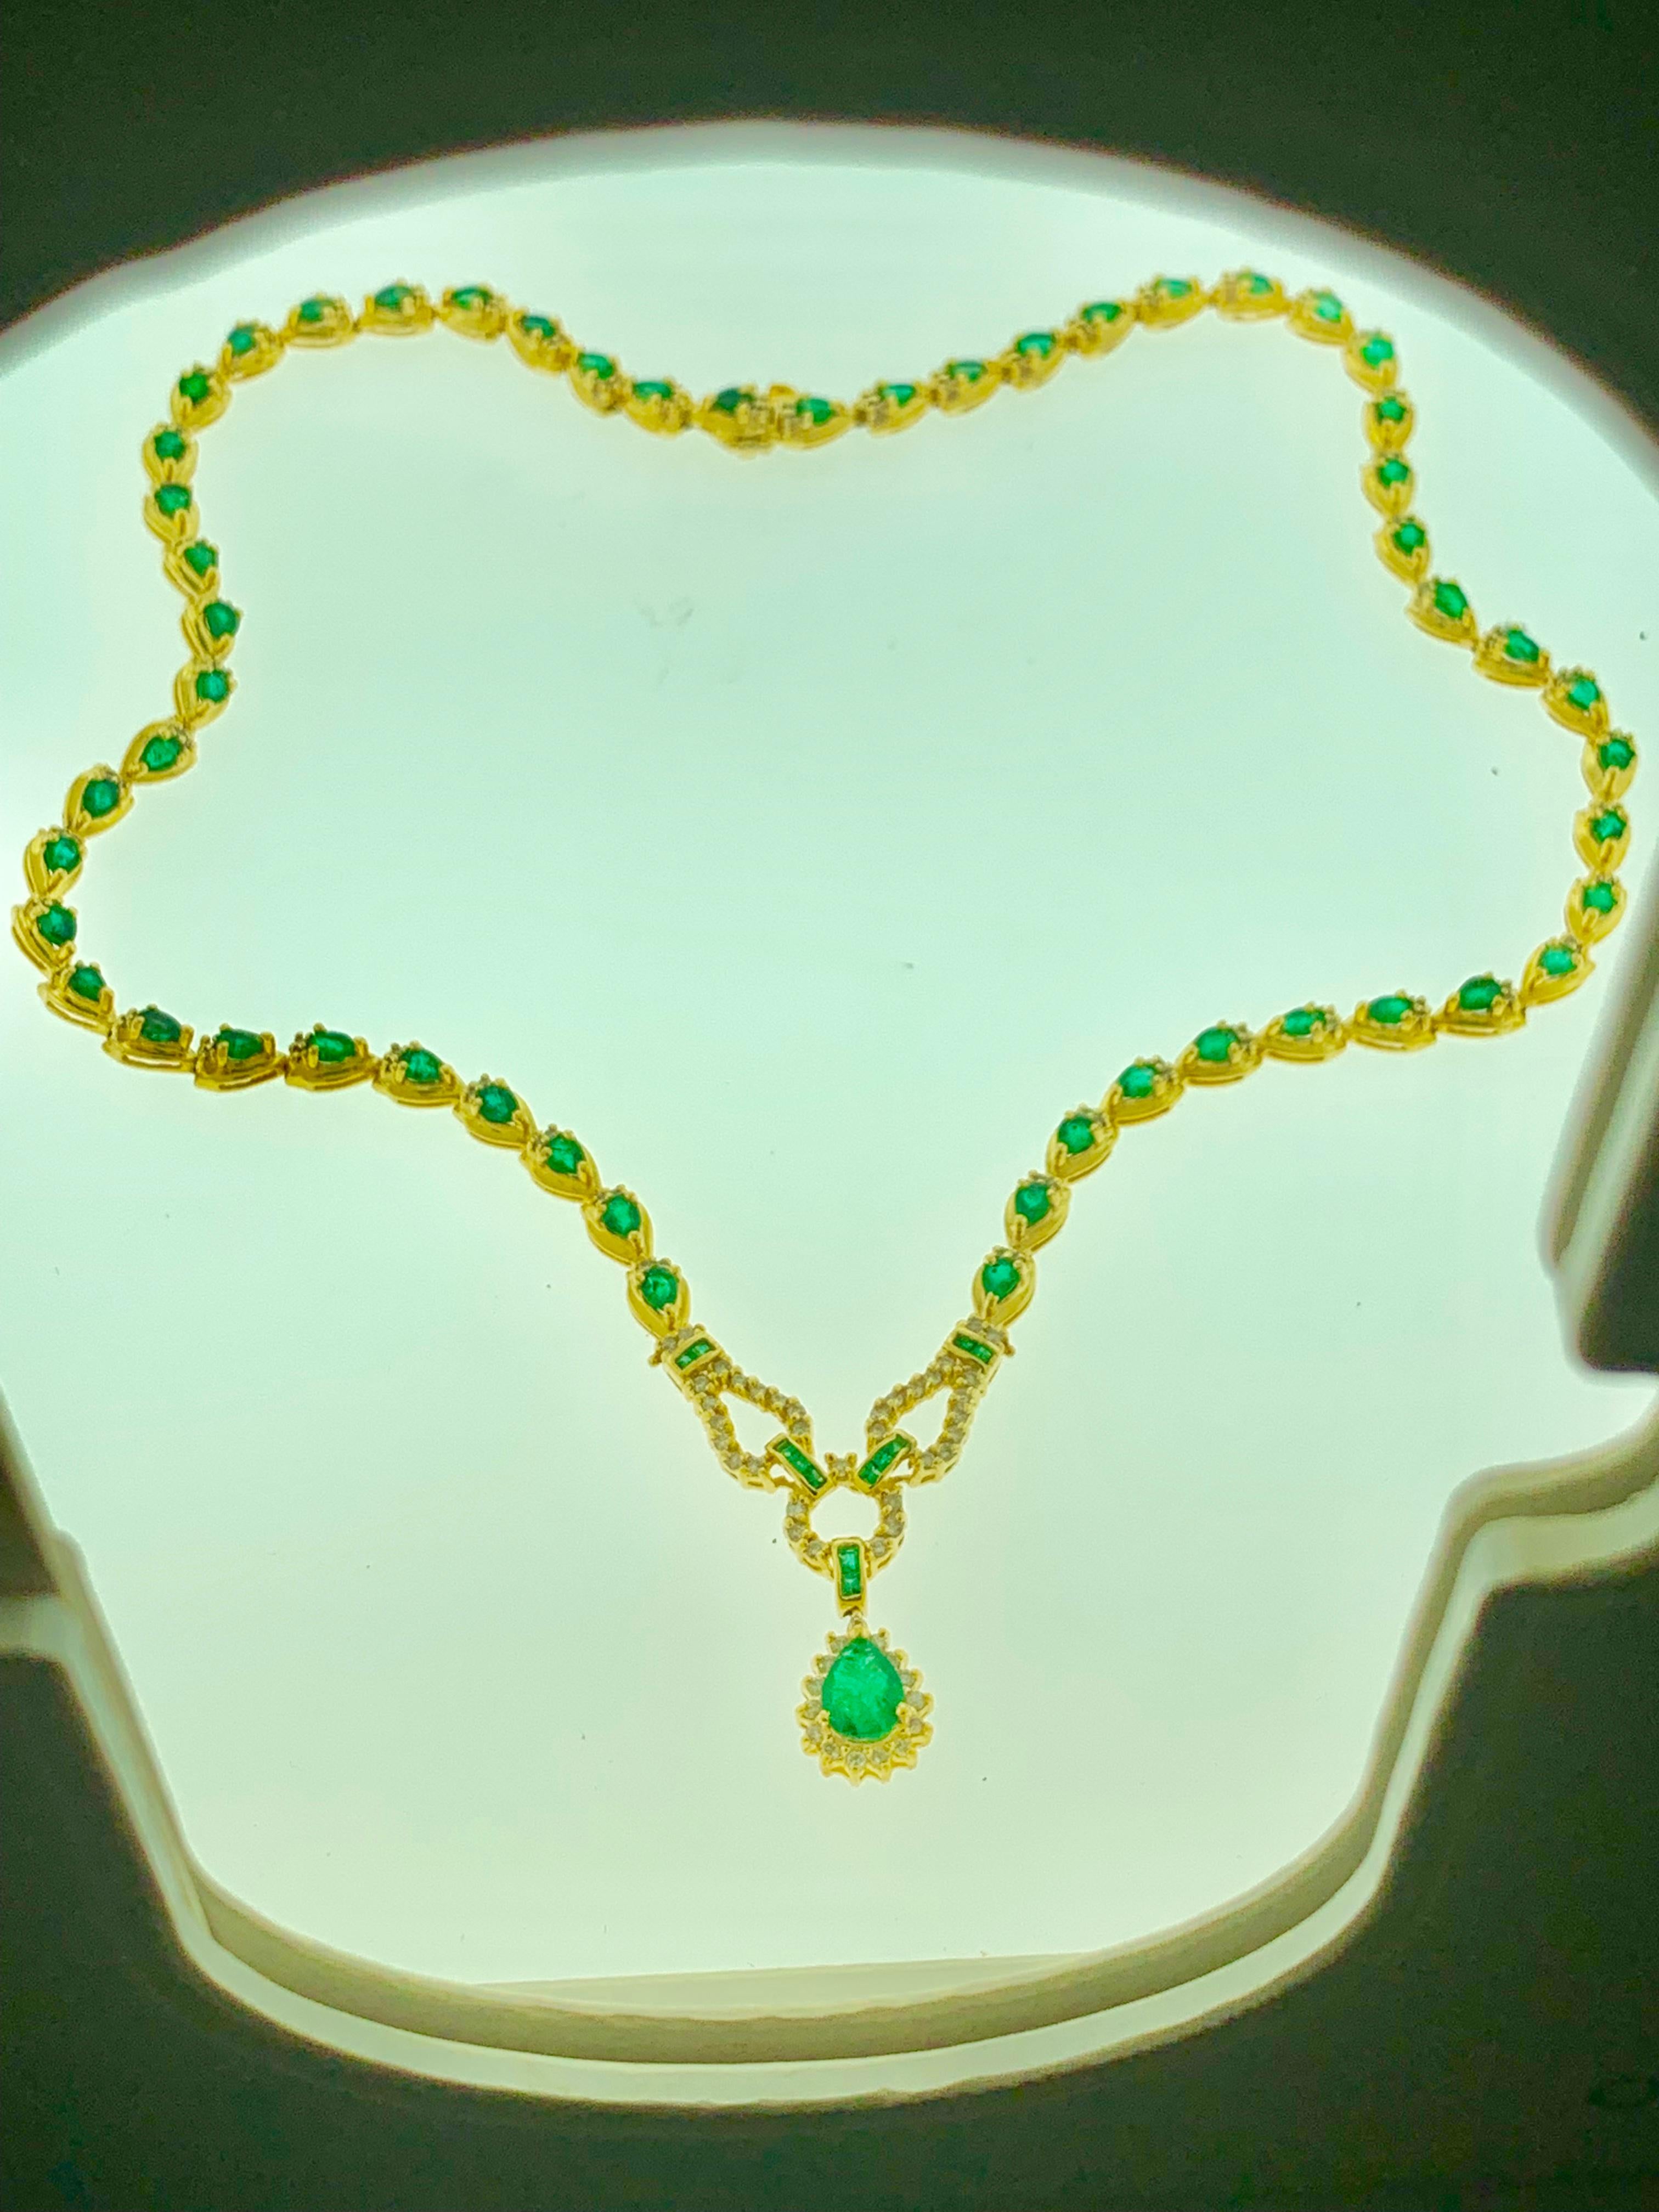 13.5 Carat Pear Shape Emerald & 1 Carat Diamond Necklace in 14 Karat Yellow Gold
This spectacular Bridal  Necklace  consisting of 55 Pear shape emeralds , each emerald approximately 25 Carat. One emerald drop in the center is big . it is 1 Ct +
Very